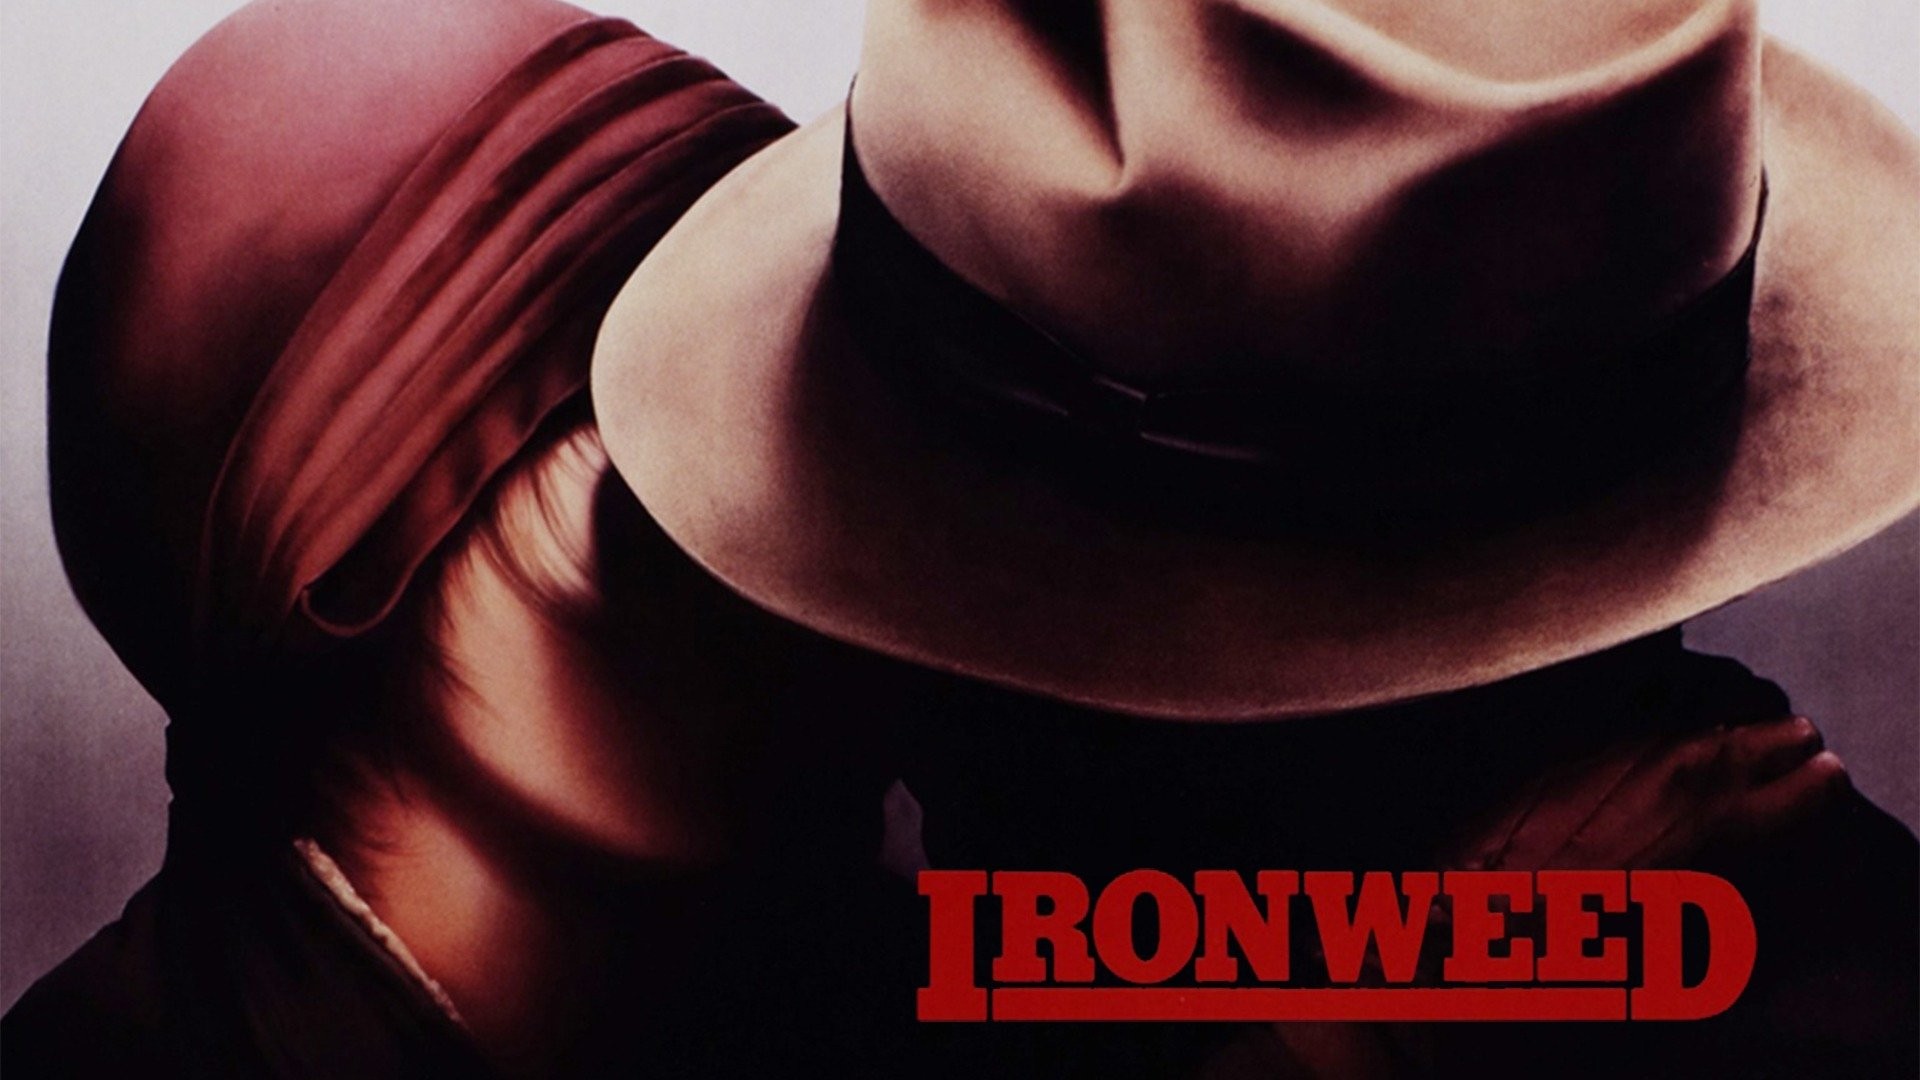 43-facts-about-the-movie-ironweed